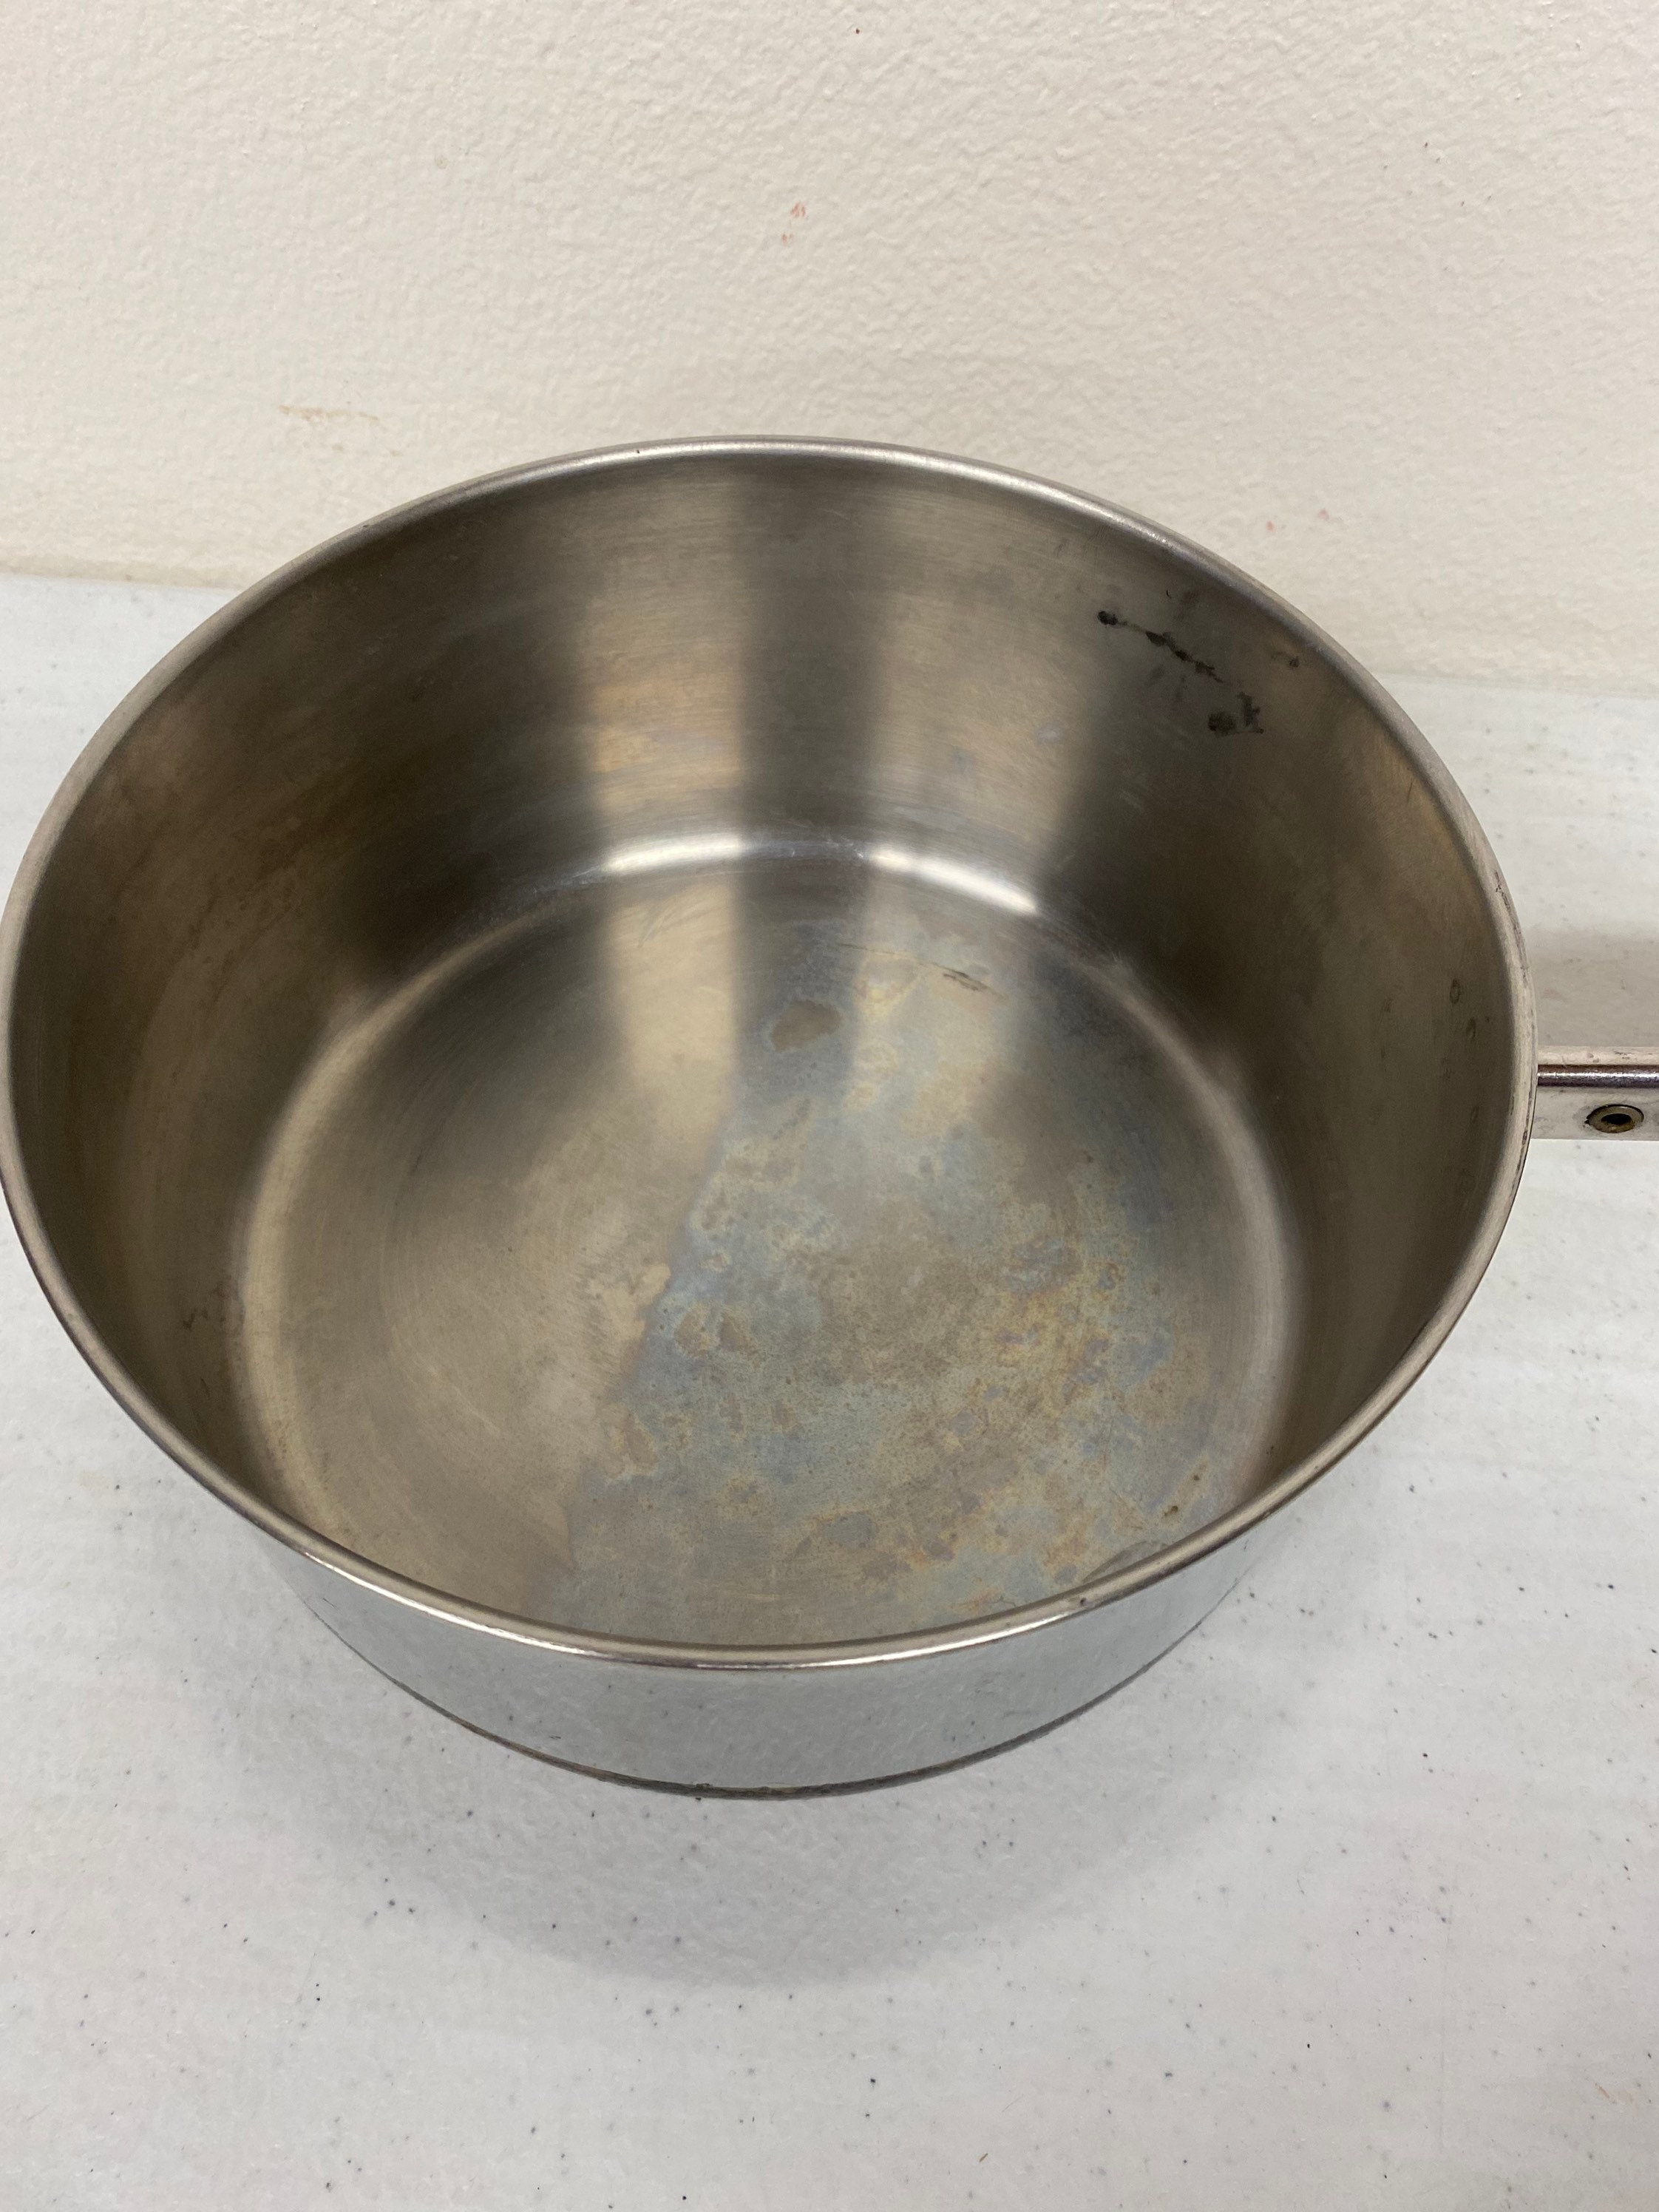 Vintage Revere Ware Stainless Steel Lidonly9 1/2 Wide. Fits Revere  Pot